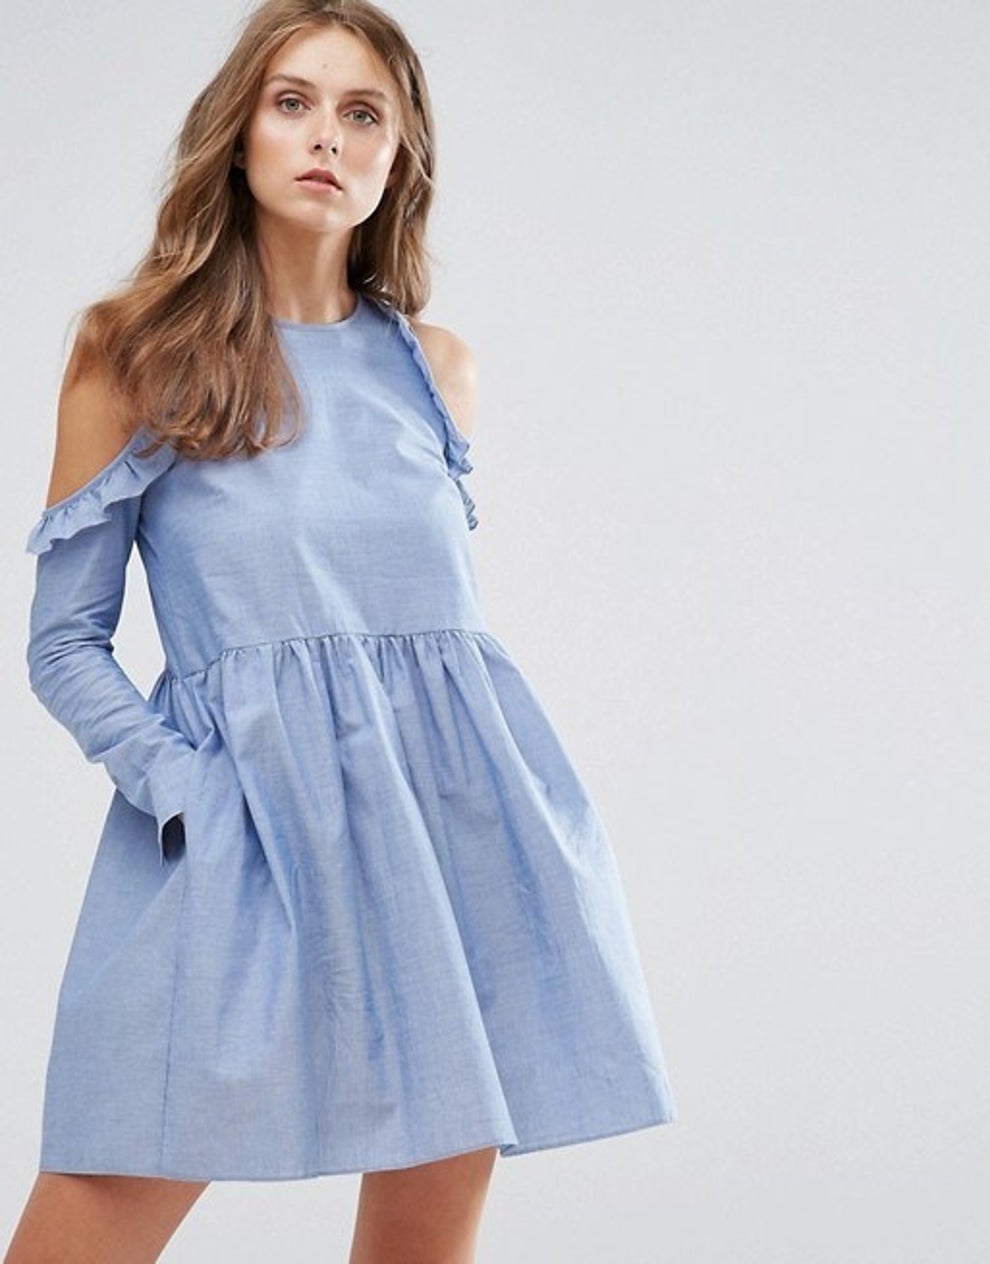 33 Dresses From Asos You'll Want To Add To Your Closet Immediately